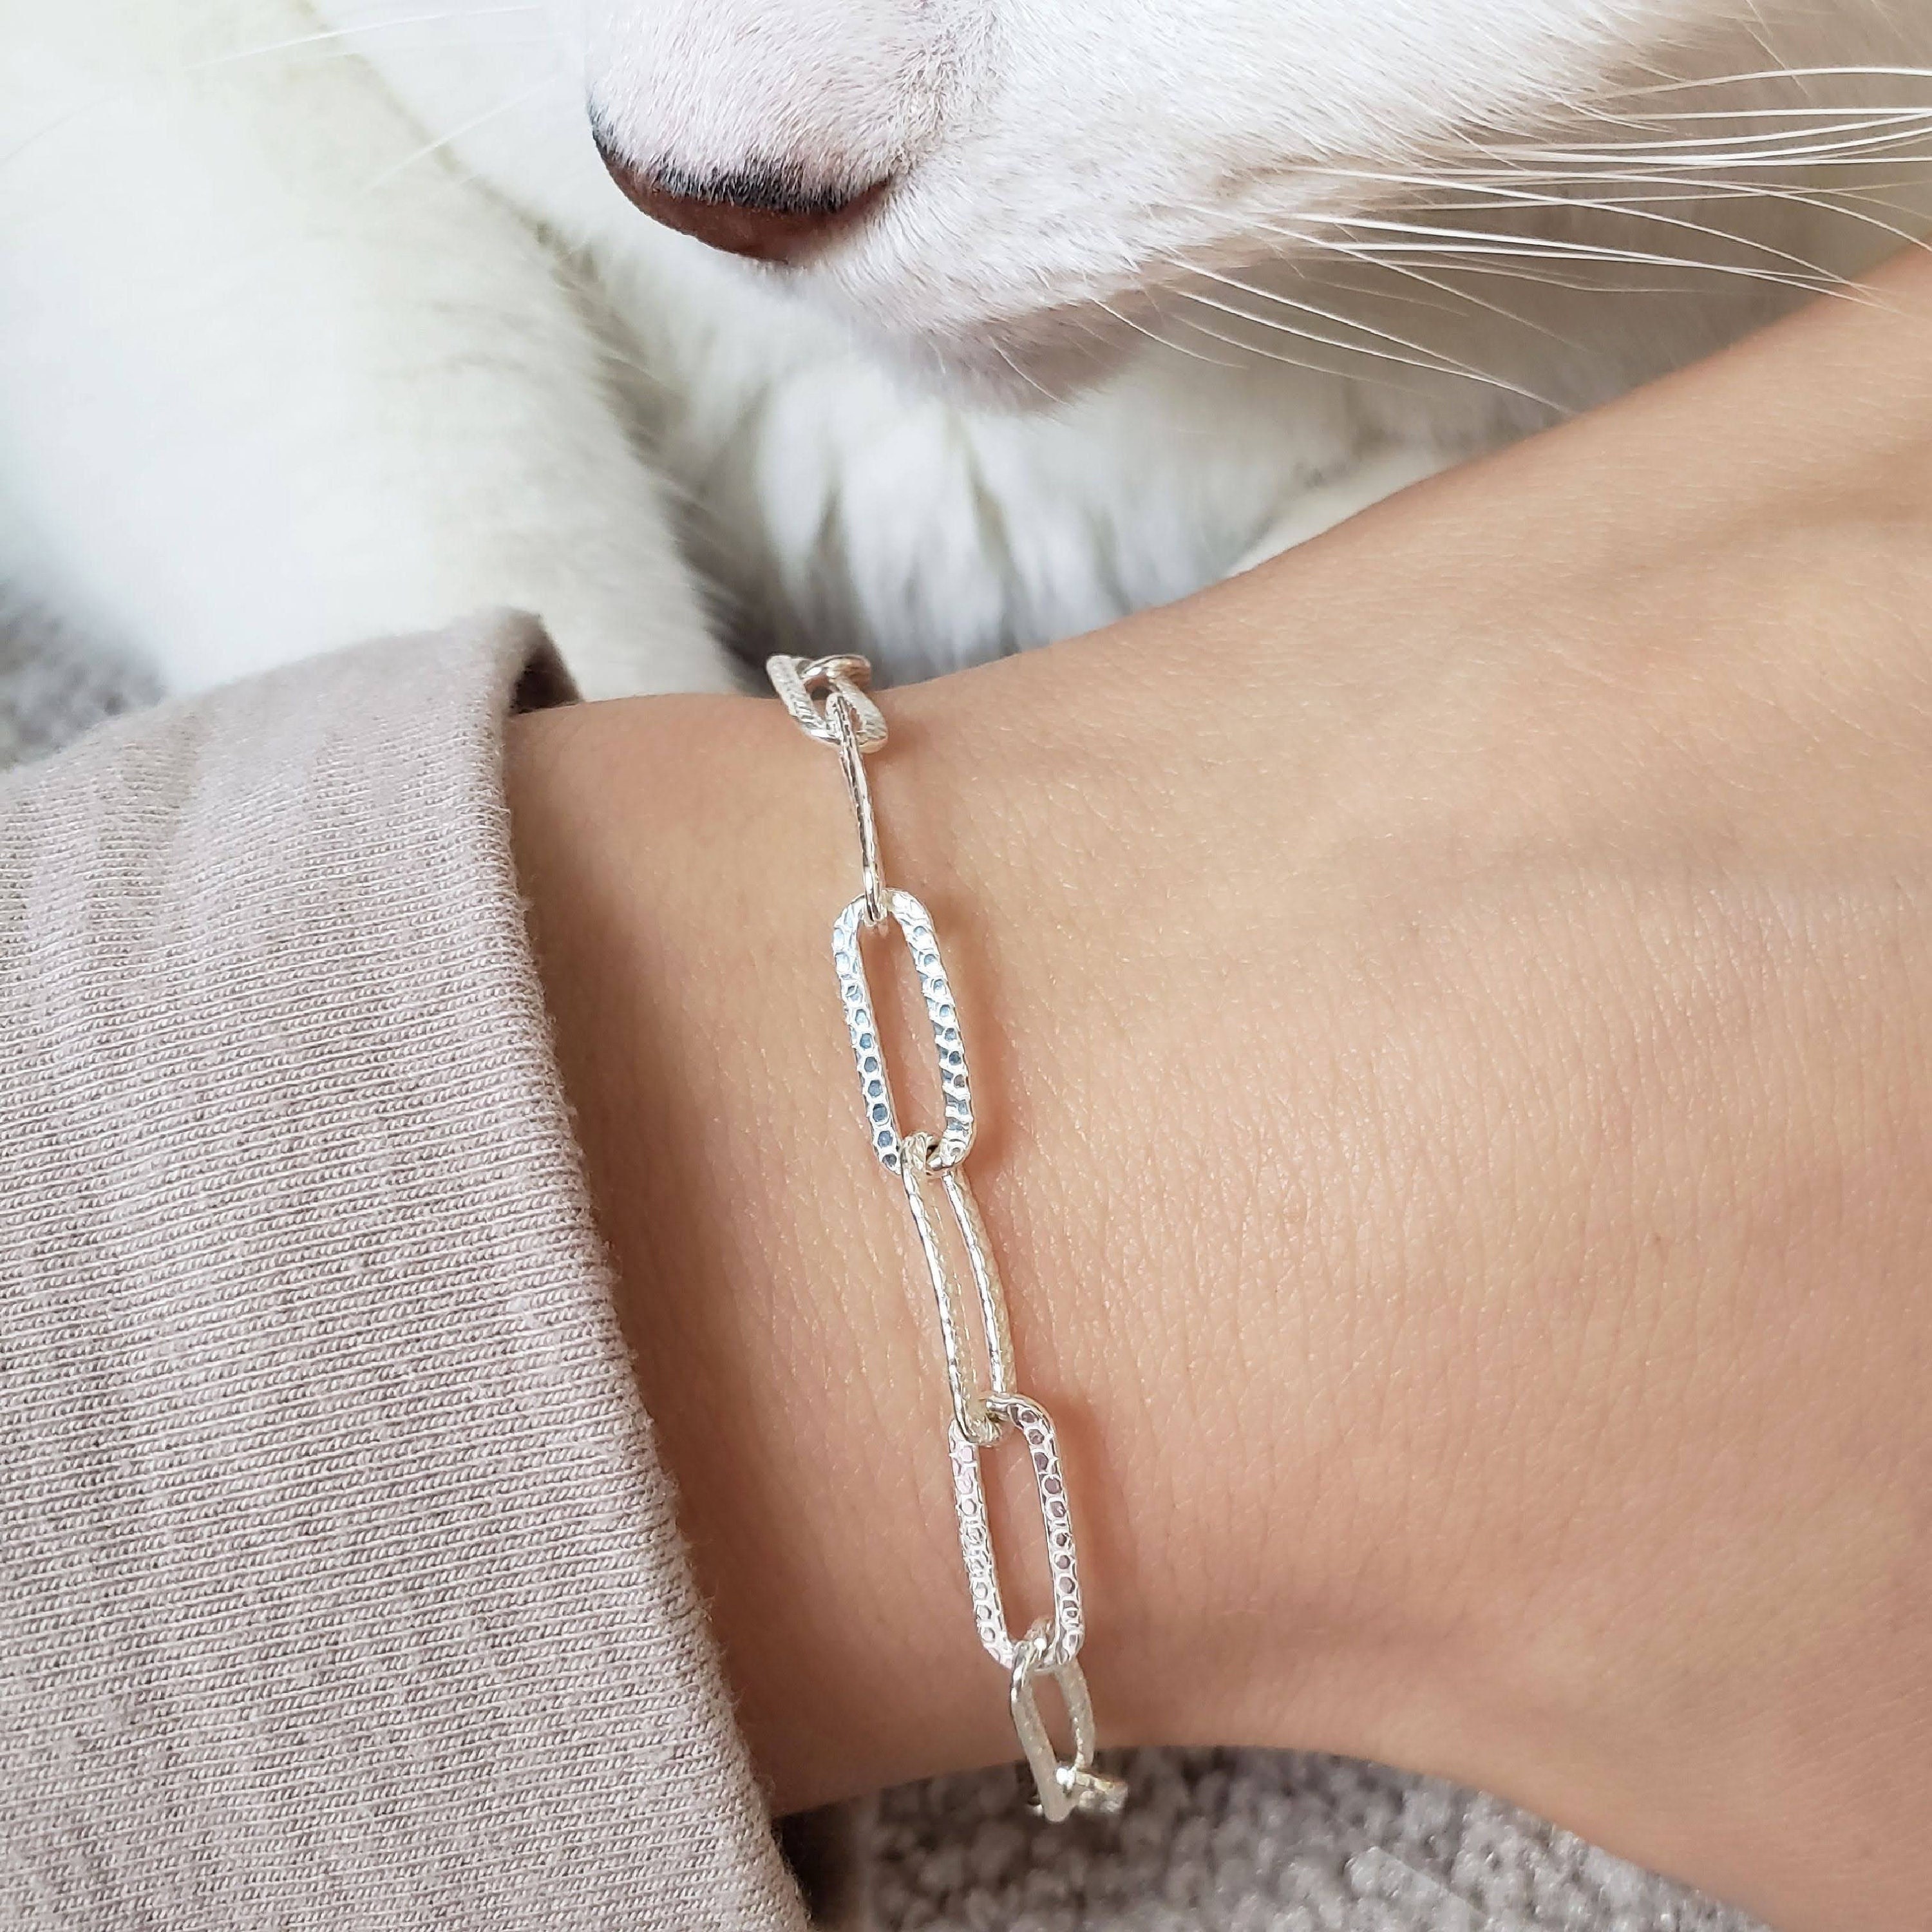 Patterned Paperclip Chain Bracelet | .925 Sterling Silver (6.5, 7, 7.5, + 8 Lengths)